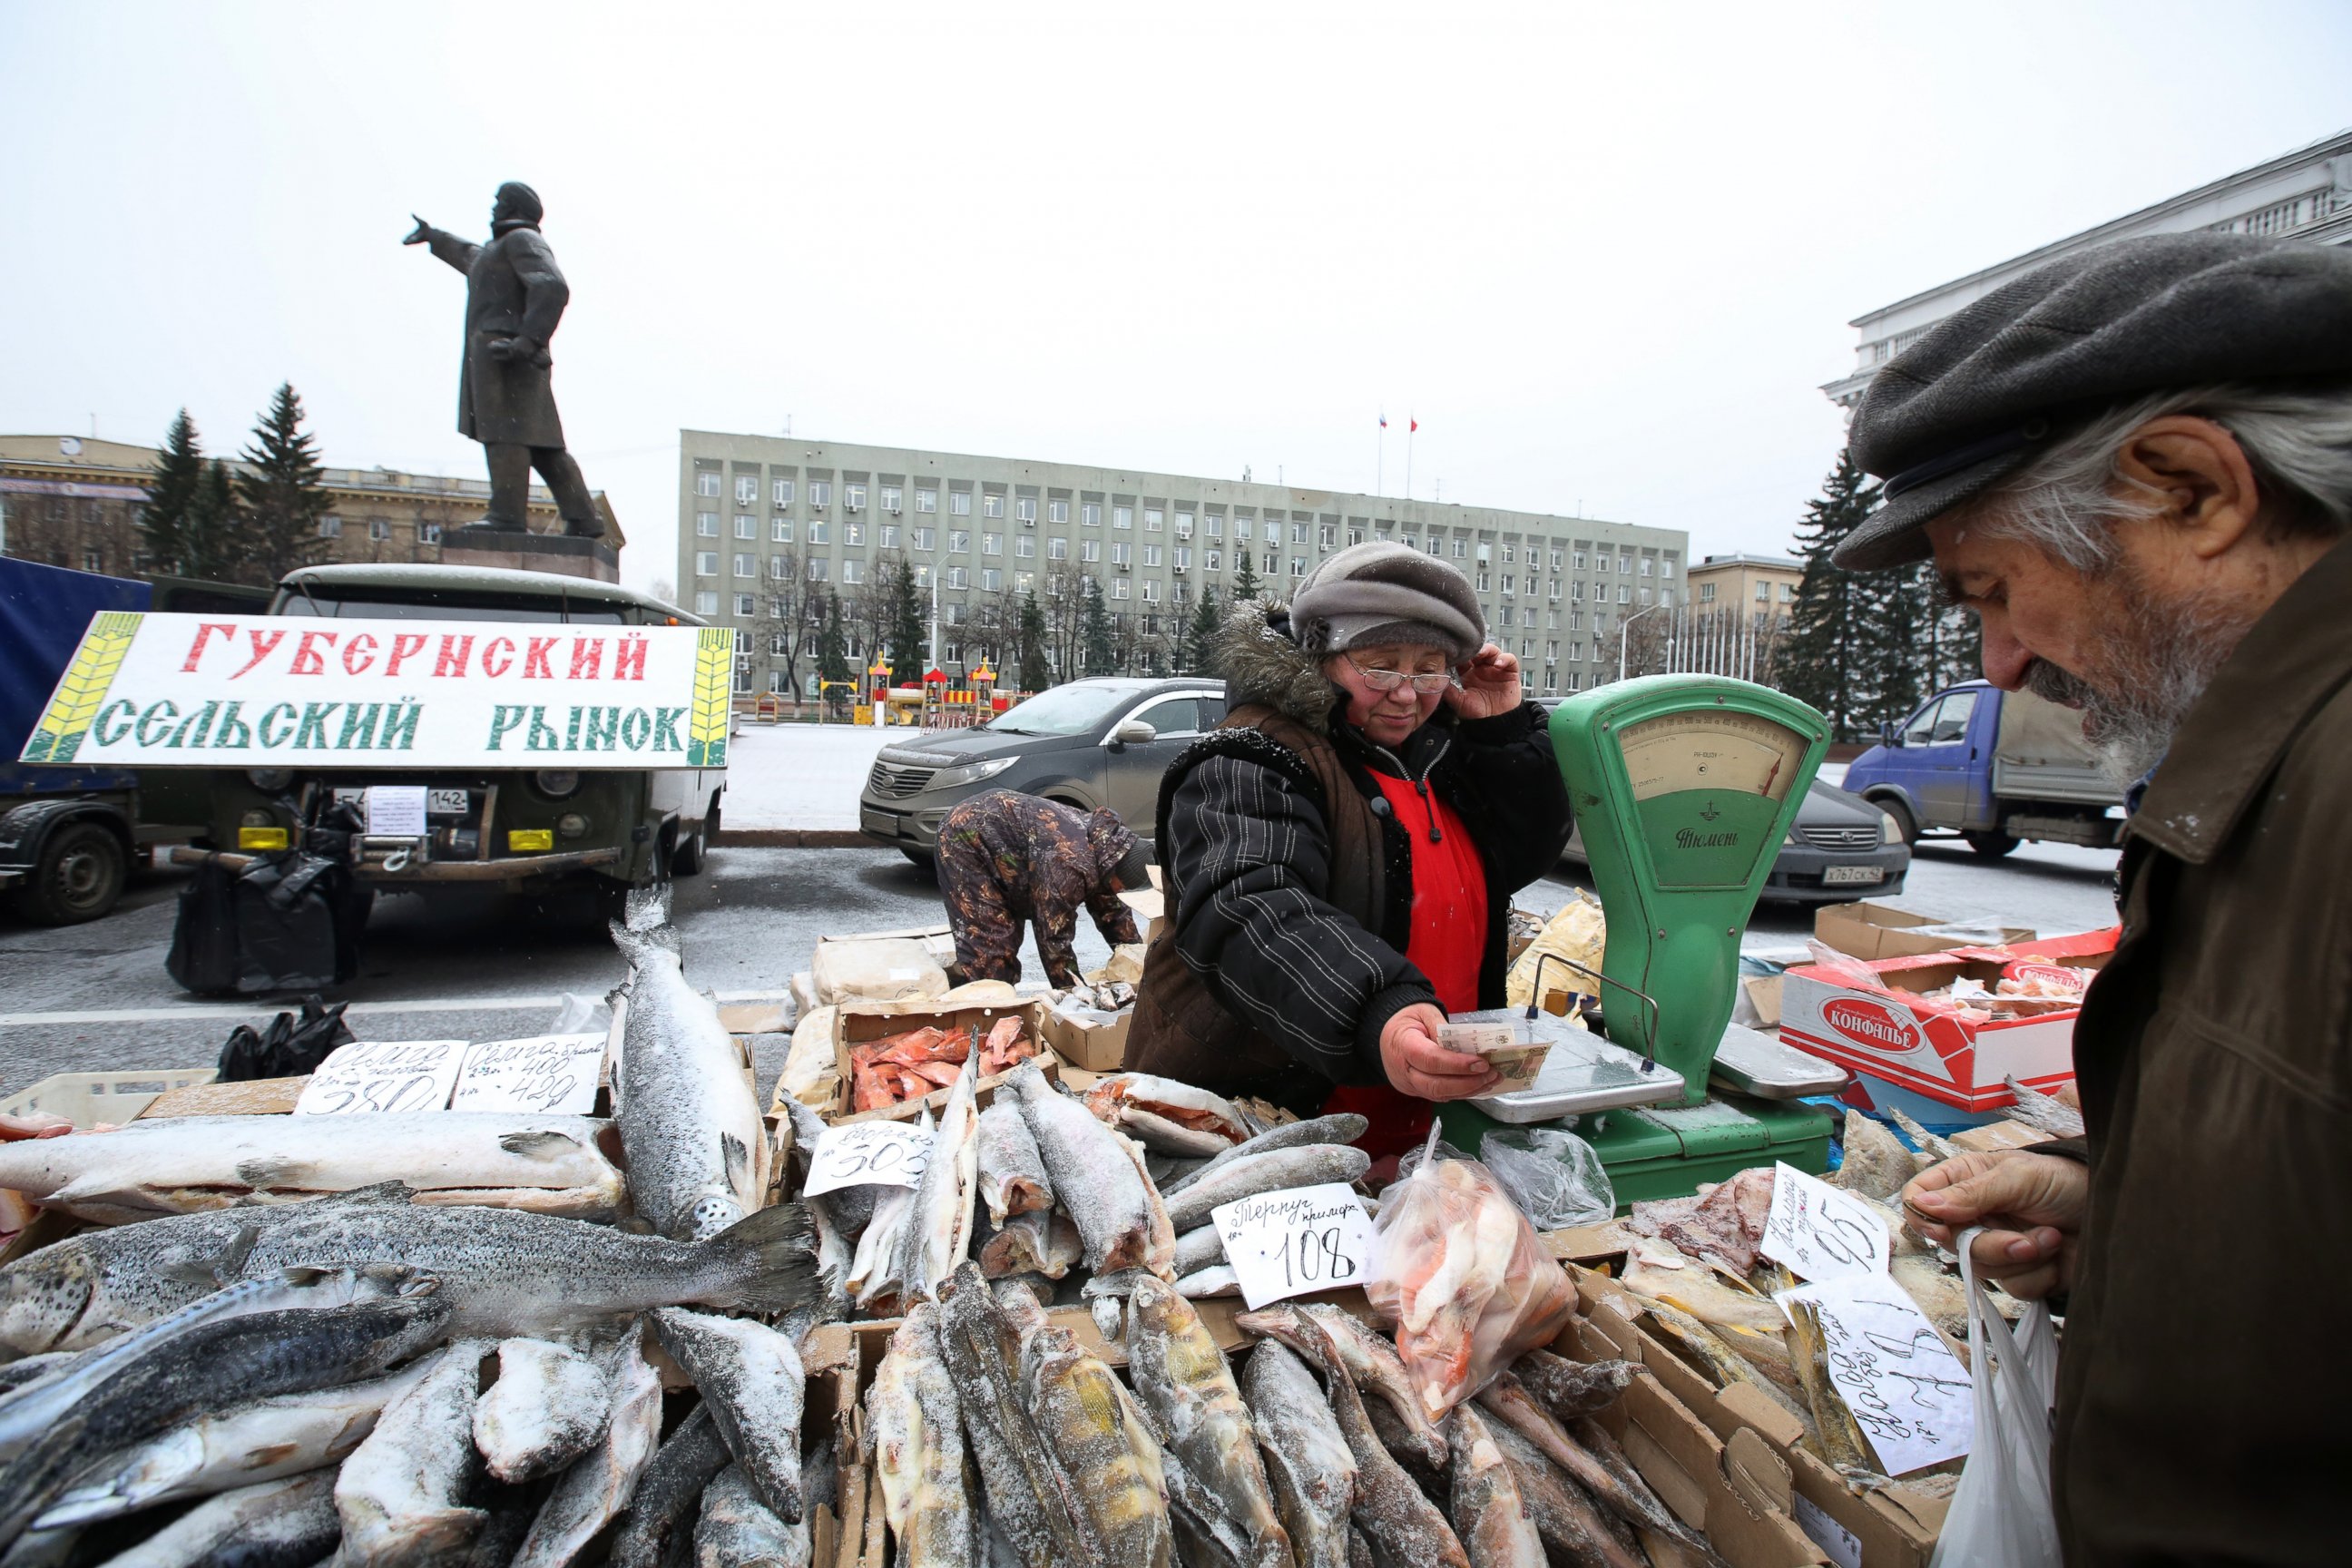 PHOTO: A statue of Vladimir Lenin stands in a central square near a monthly street market where a vendor sells fresh fish in Sovetov square, Kemerovo, Russia, Oct. 24, 2014.